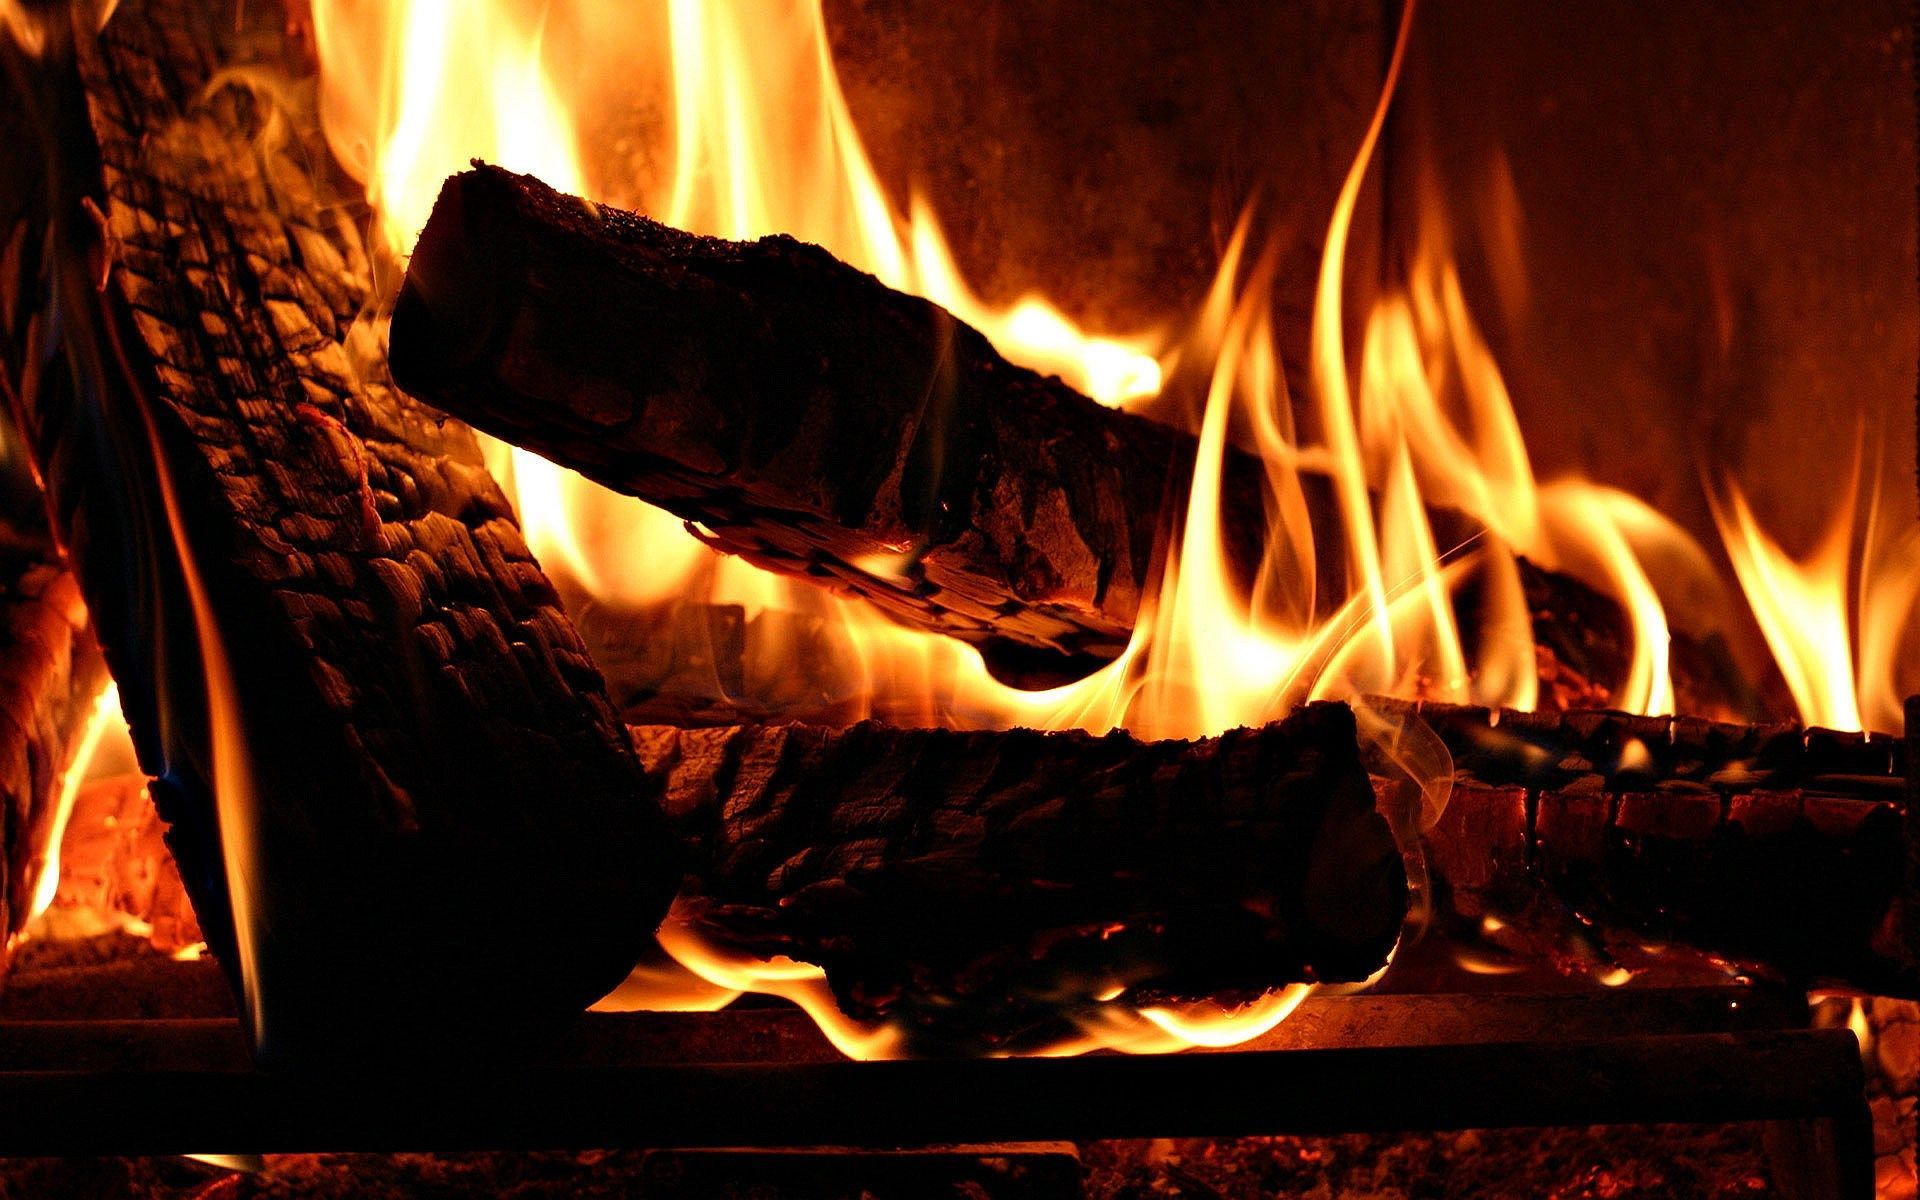 fire free computer wallpaper download. Fireplace picture, Fireplace, Screen savers wallpaper